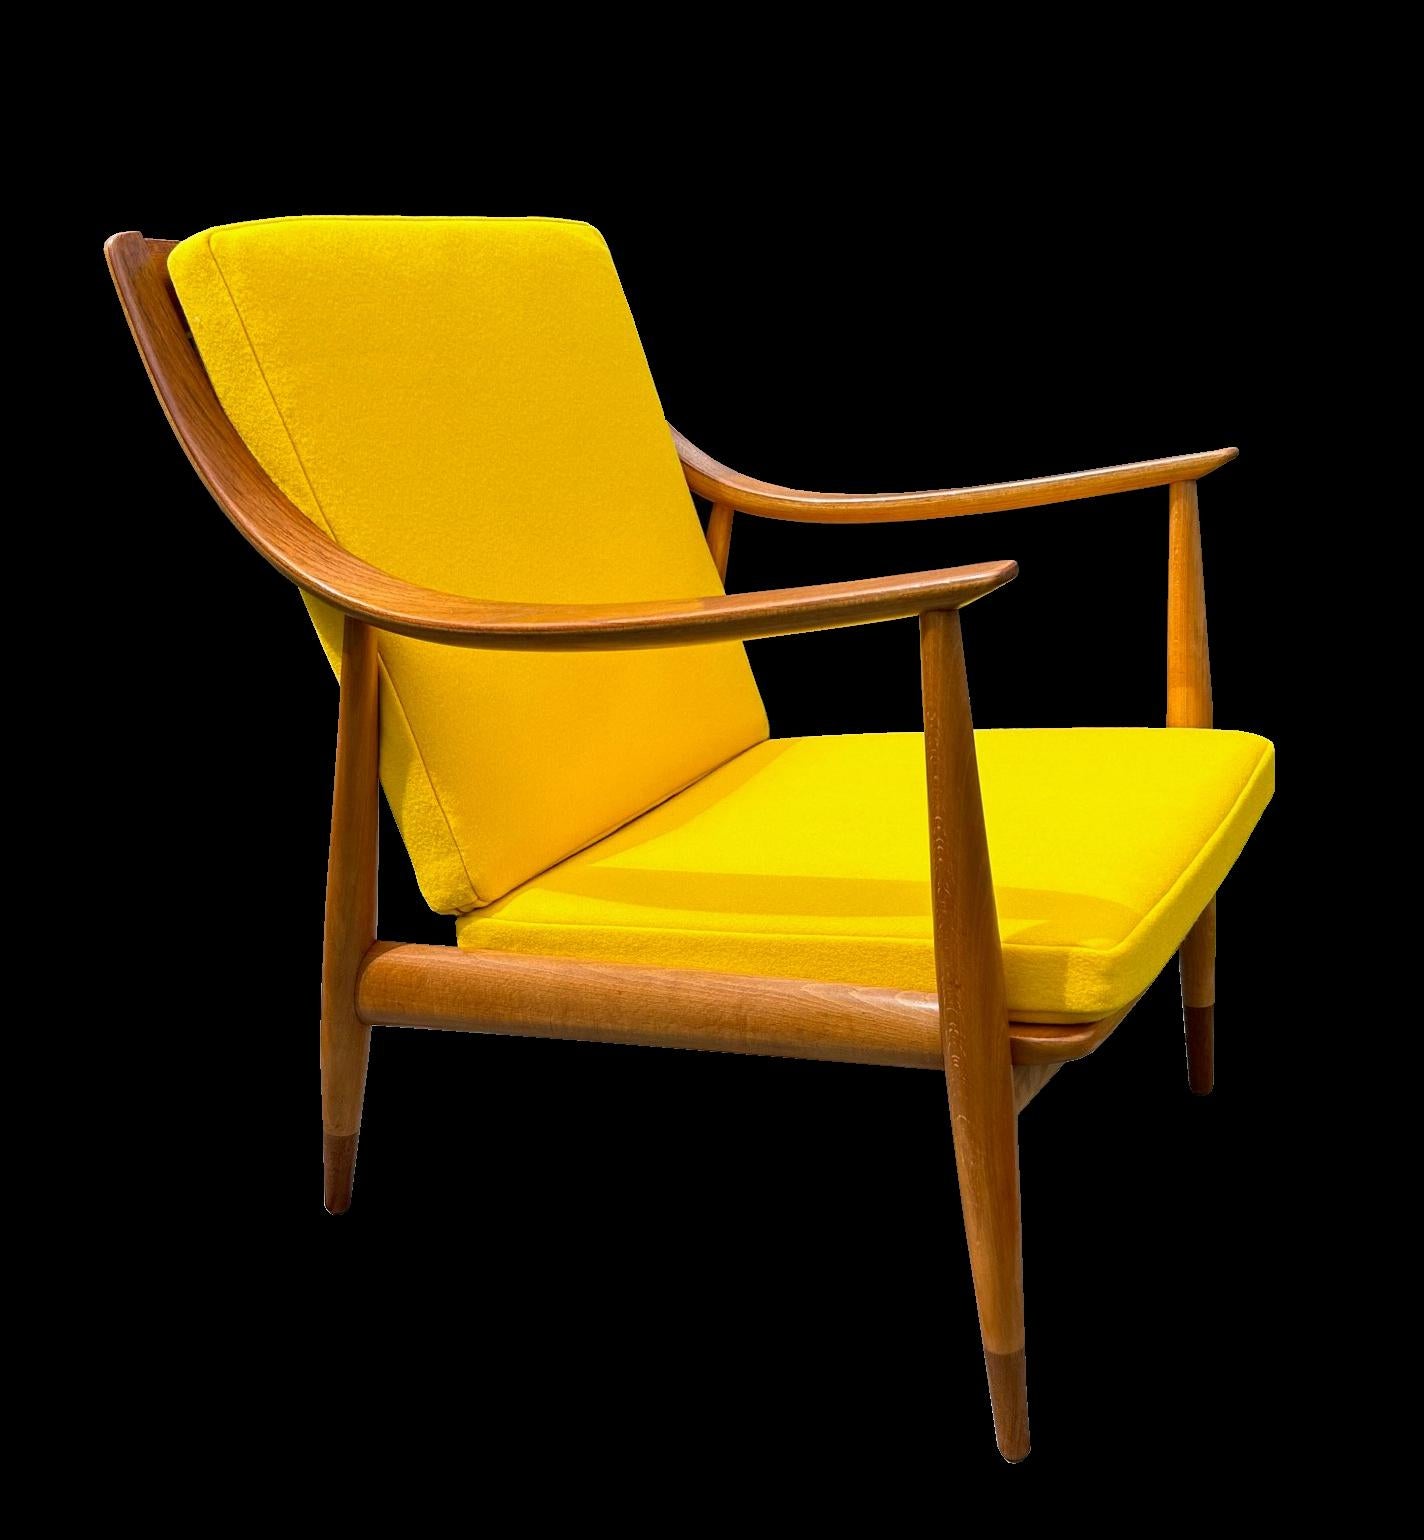 An original version of this very stylish lounge chair by Hvidt & Molgaard-Nielsen, the frame in great condition, and the covers freshly recovered in best quality wool fabric in the original colour.